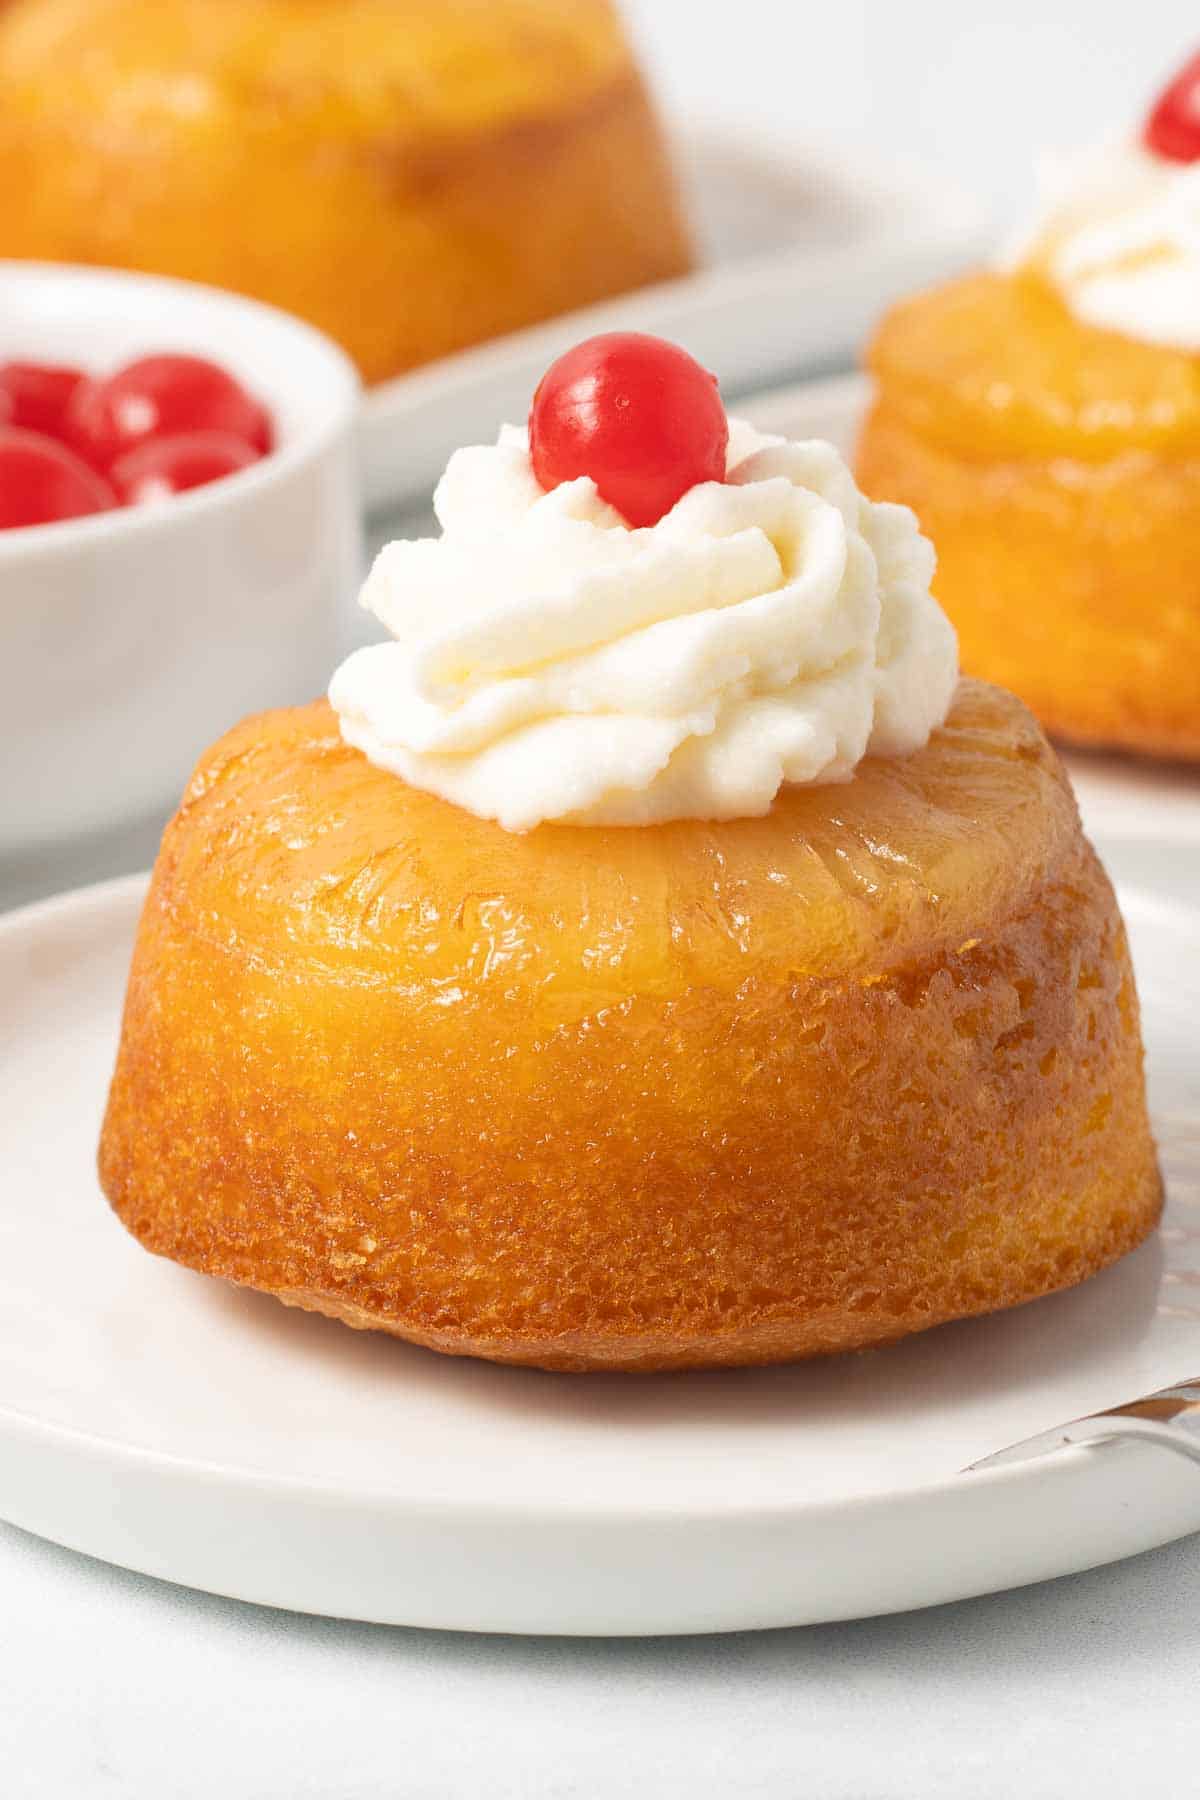 A small pineapple upside down cake topped with whipped cream and a cherry.